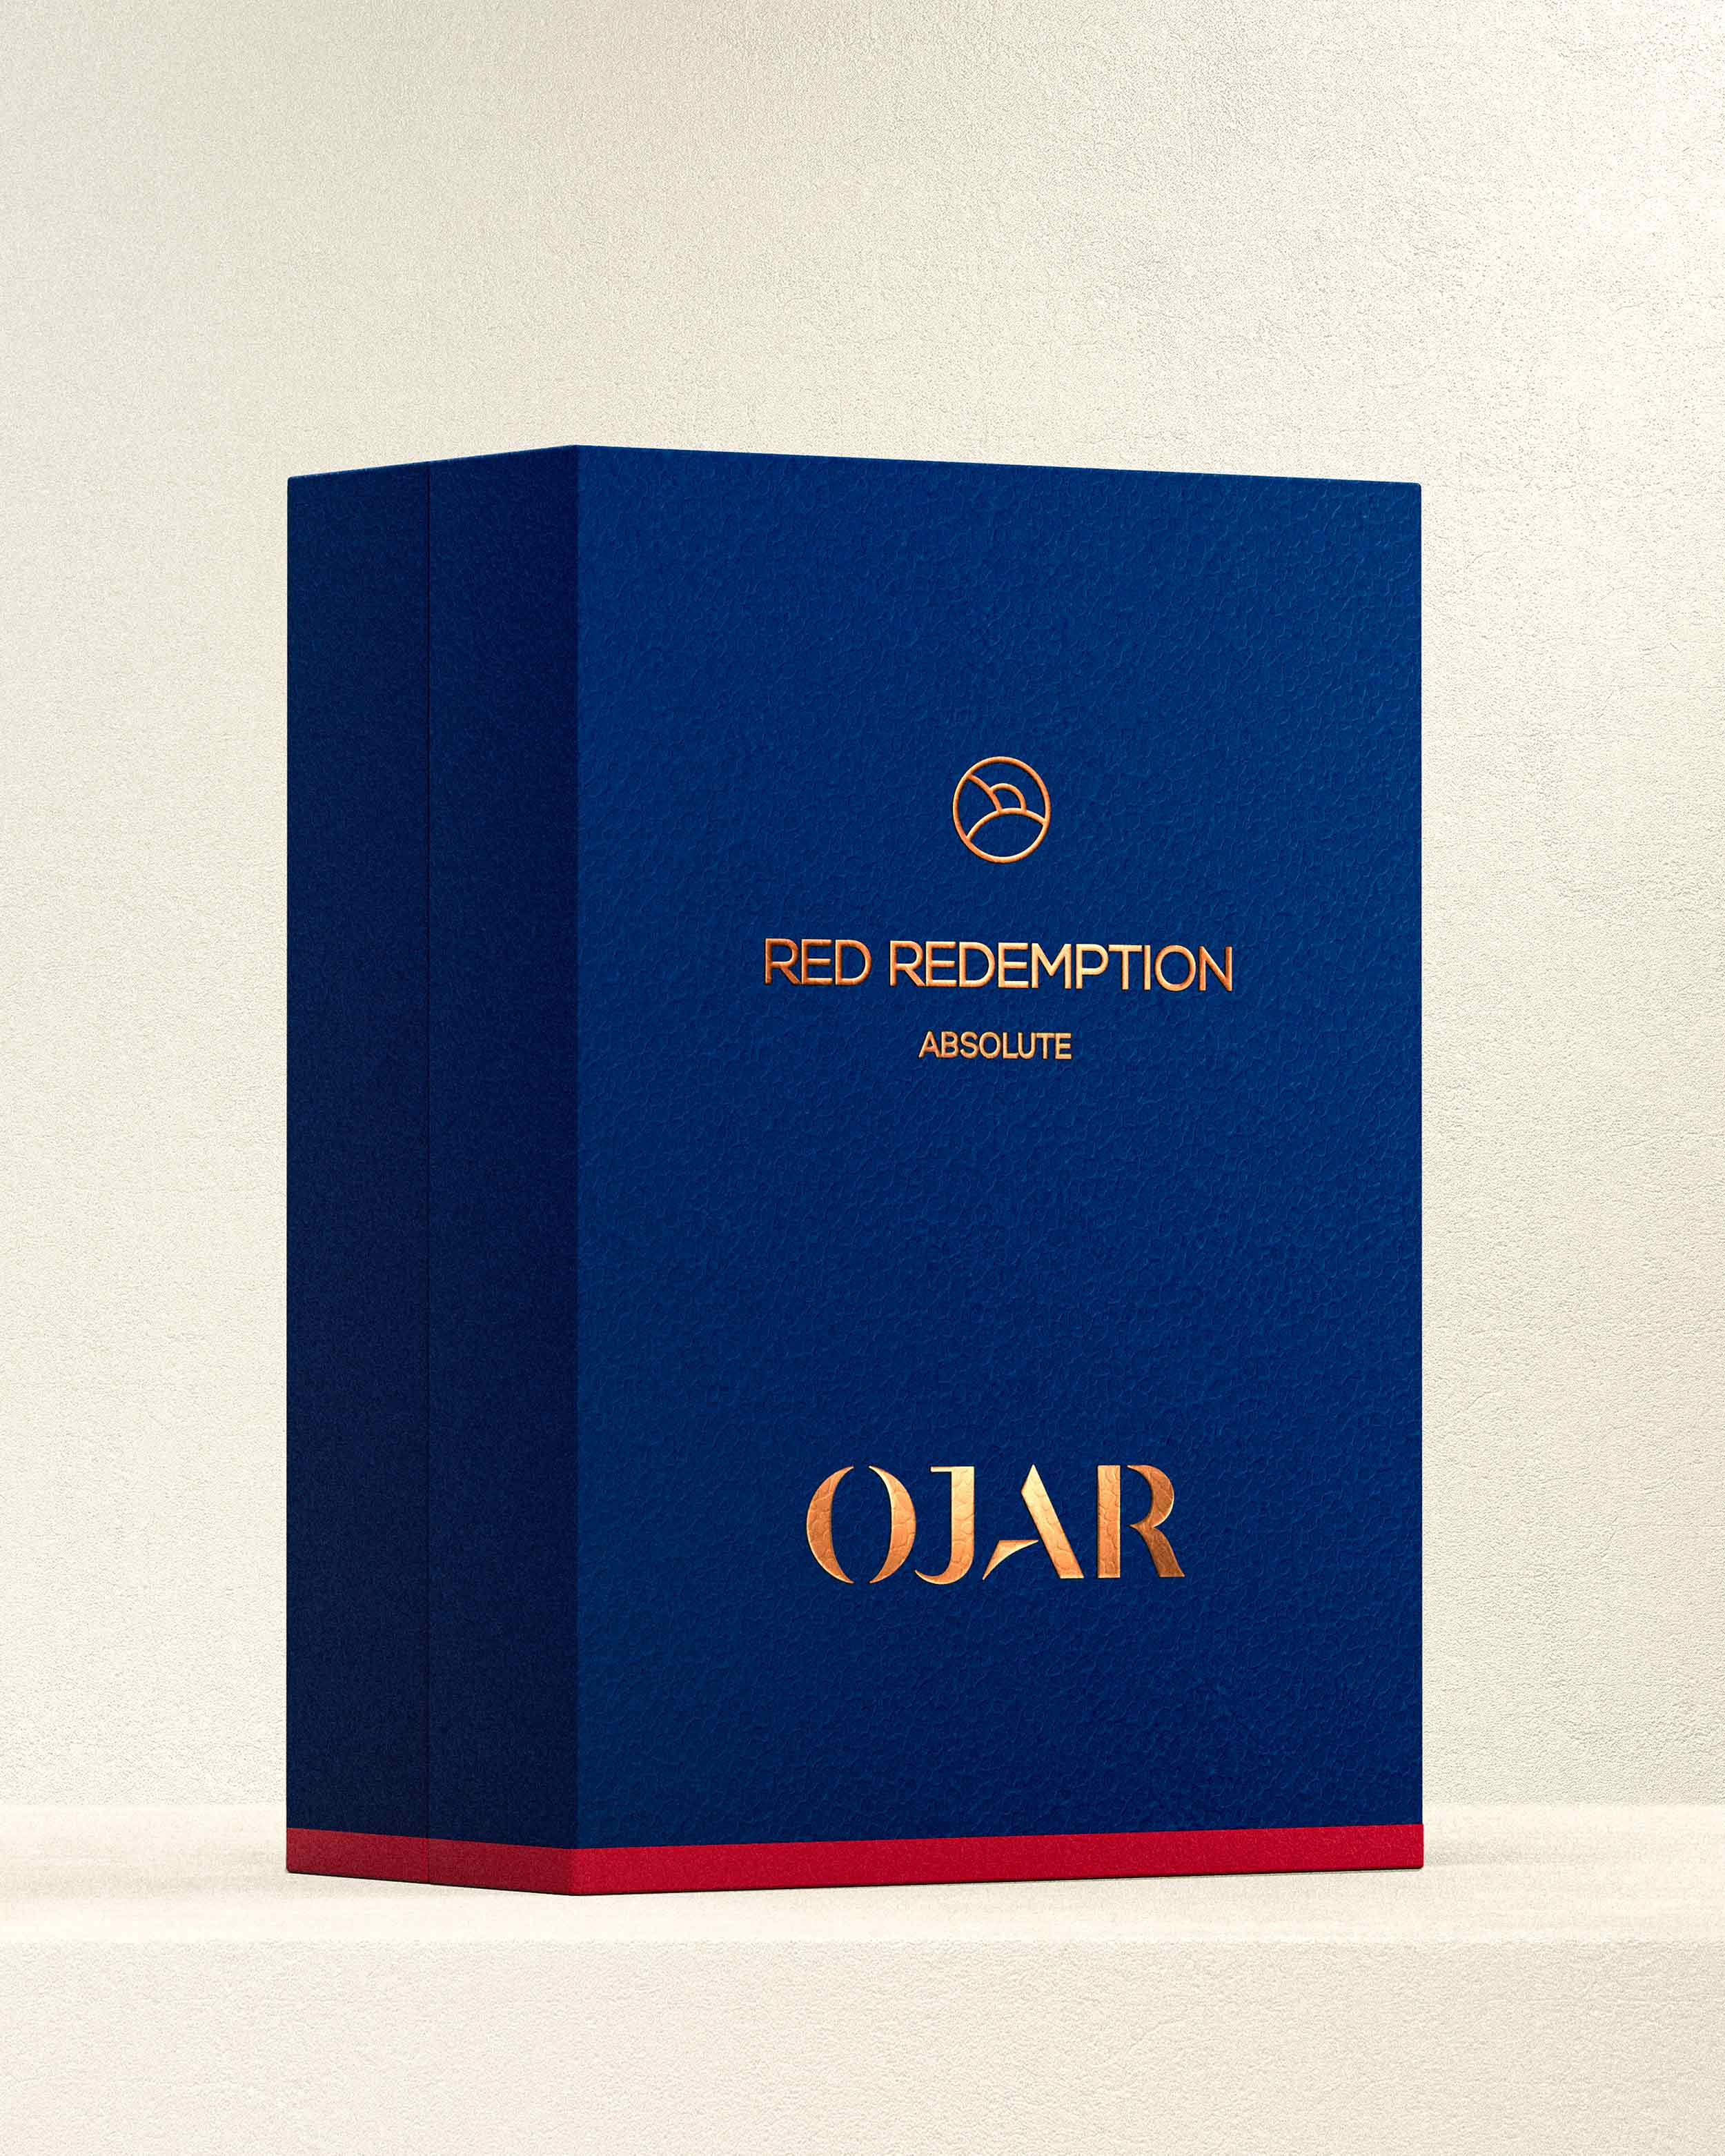 OJAR Absolute Red Redemption Perfume Pack